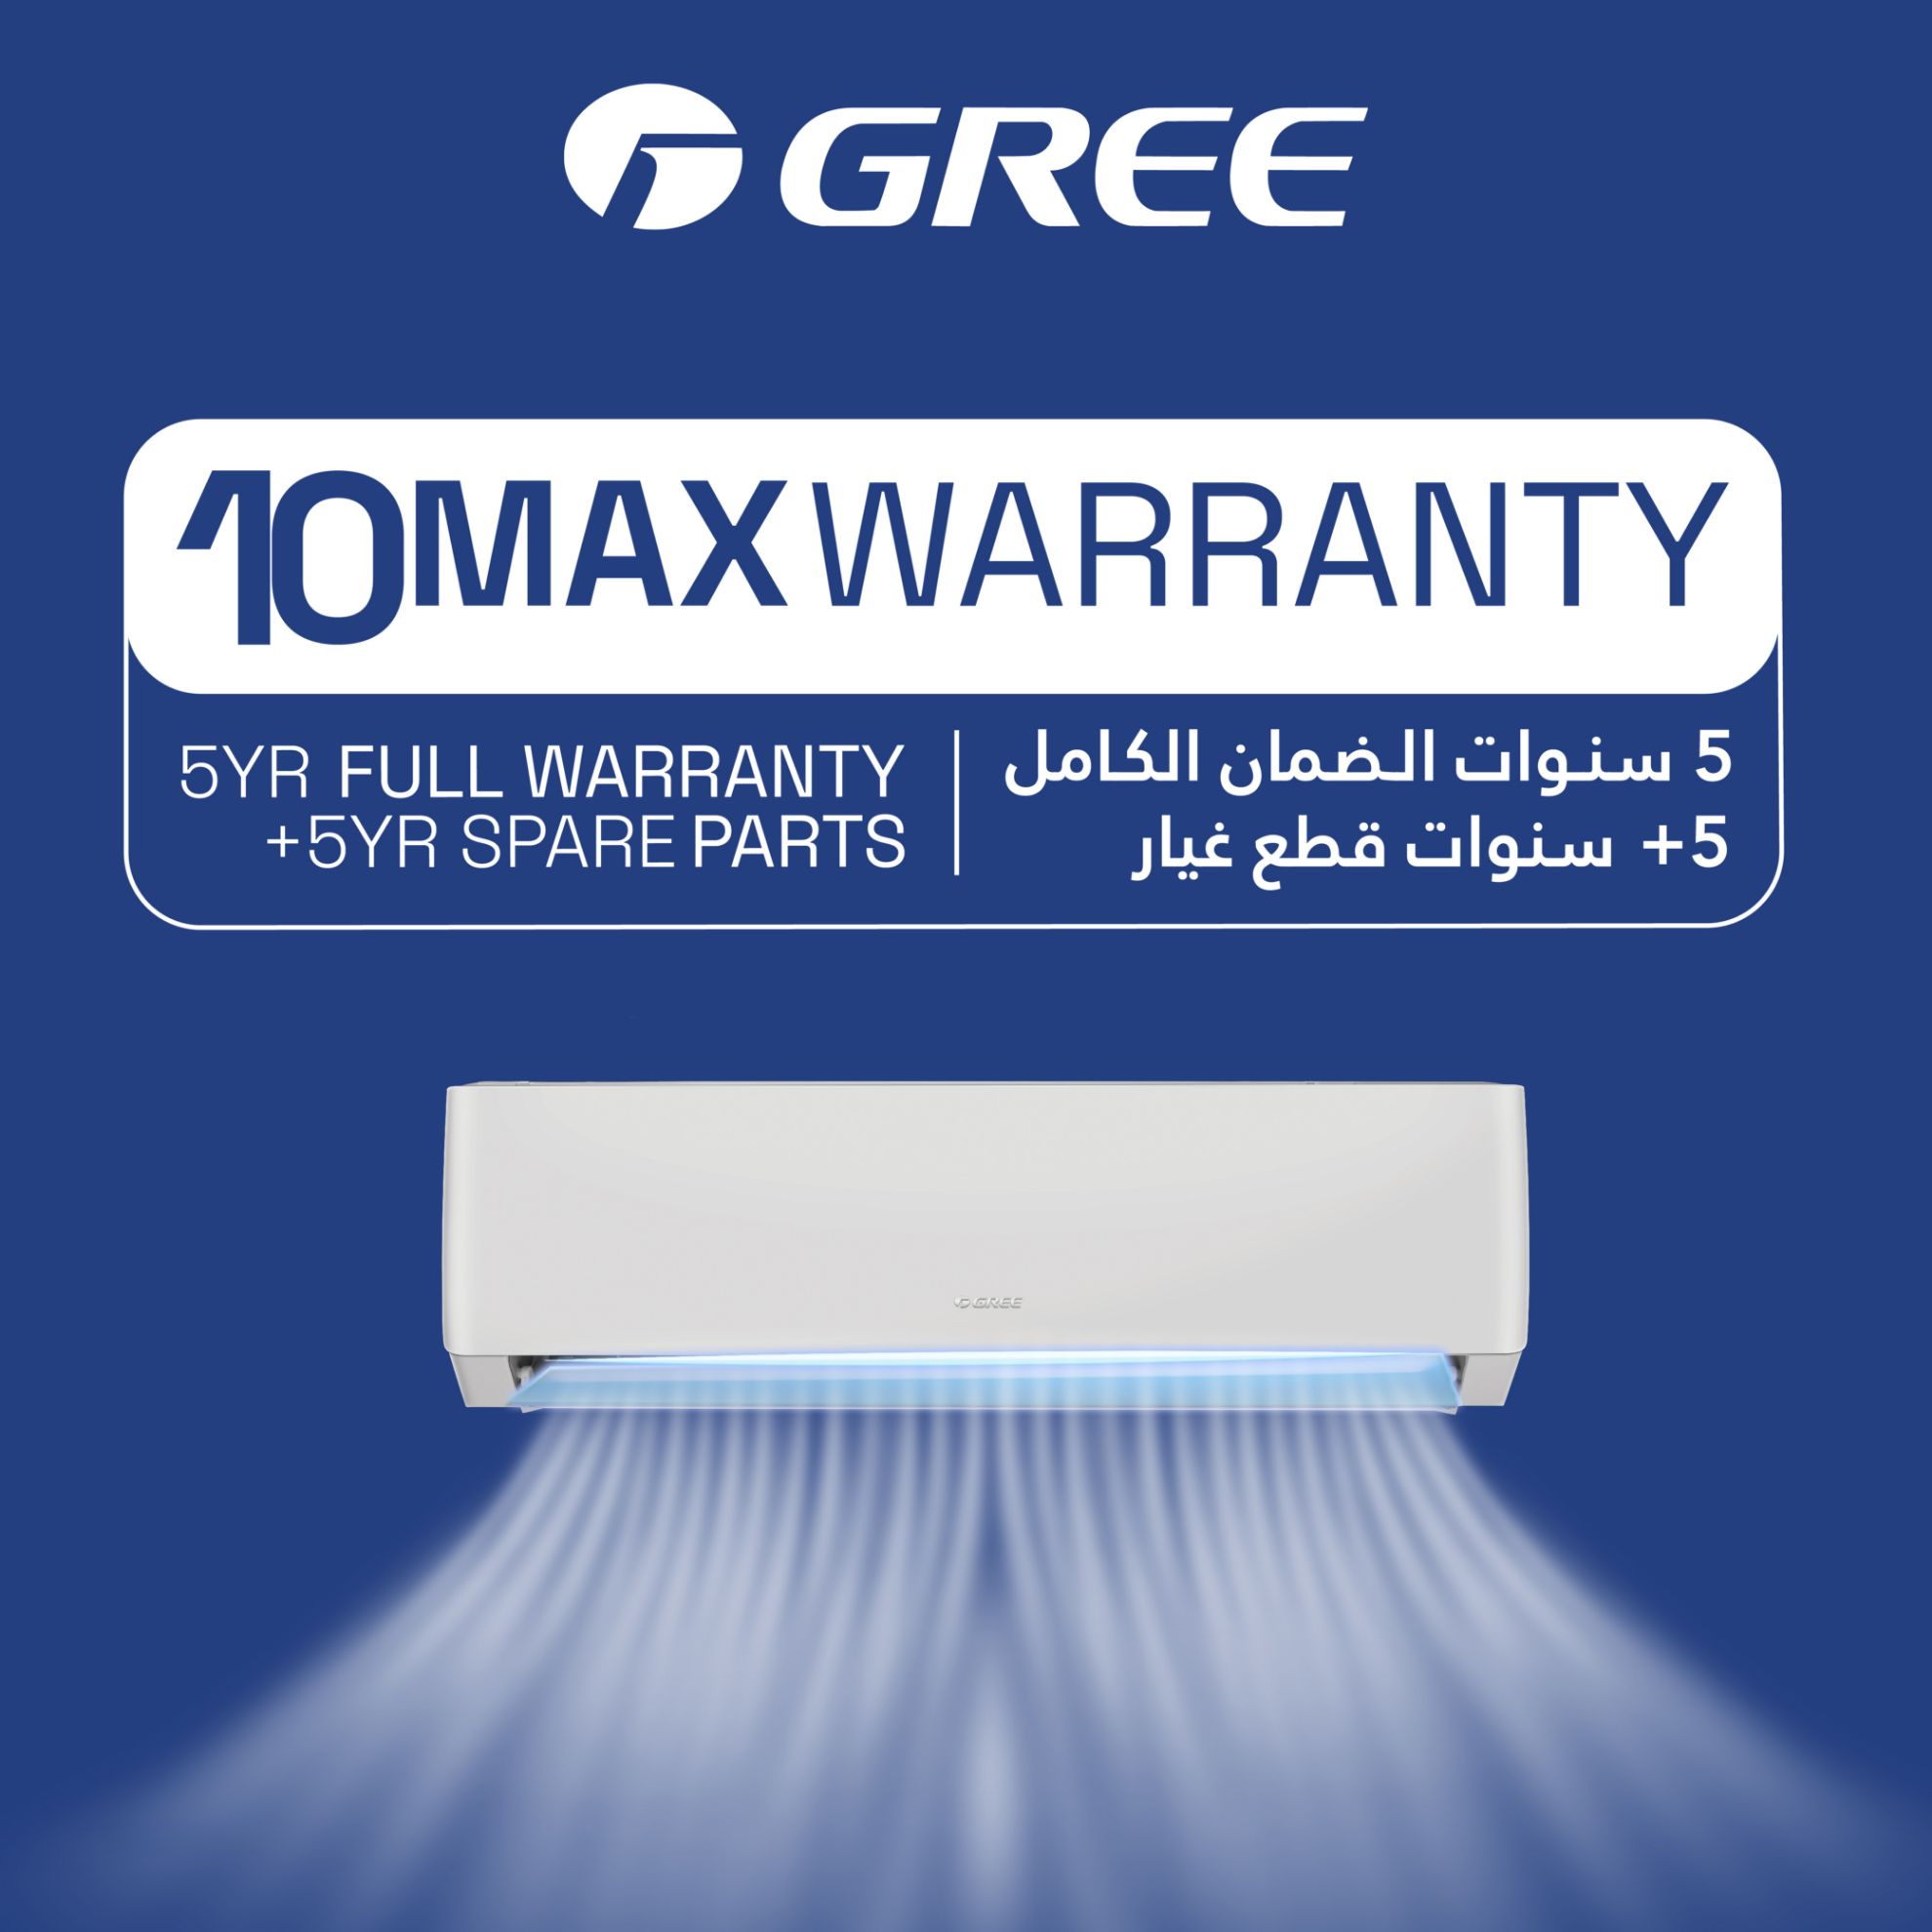 Picture of Gree - Lomo-P25C3 - 2.0 Ton|Reciprocating|Wall Split AC